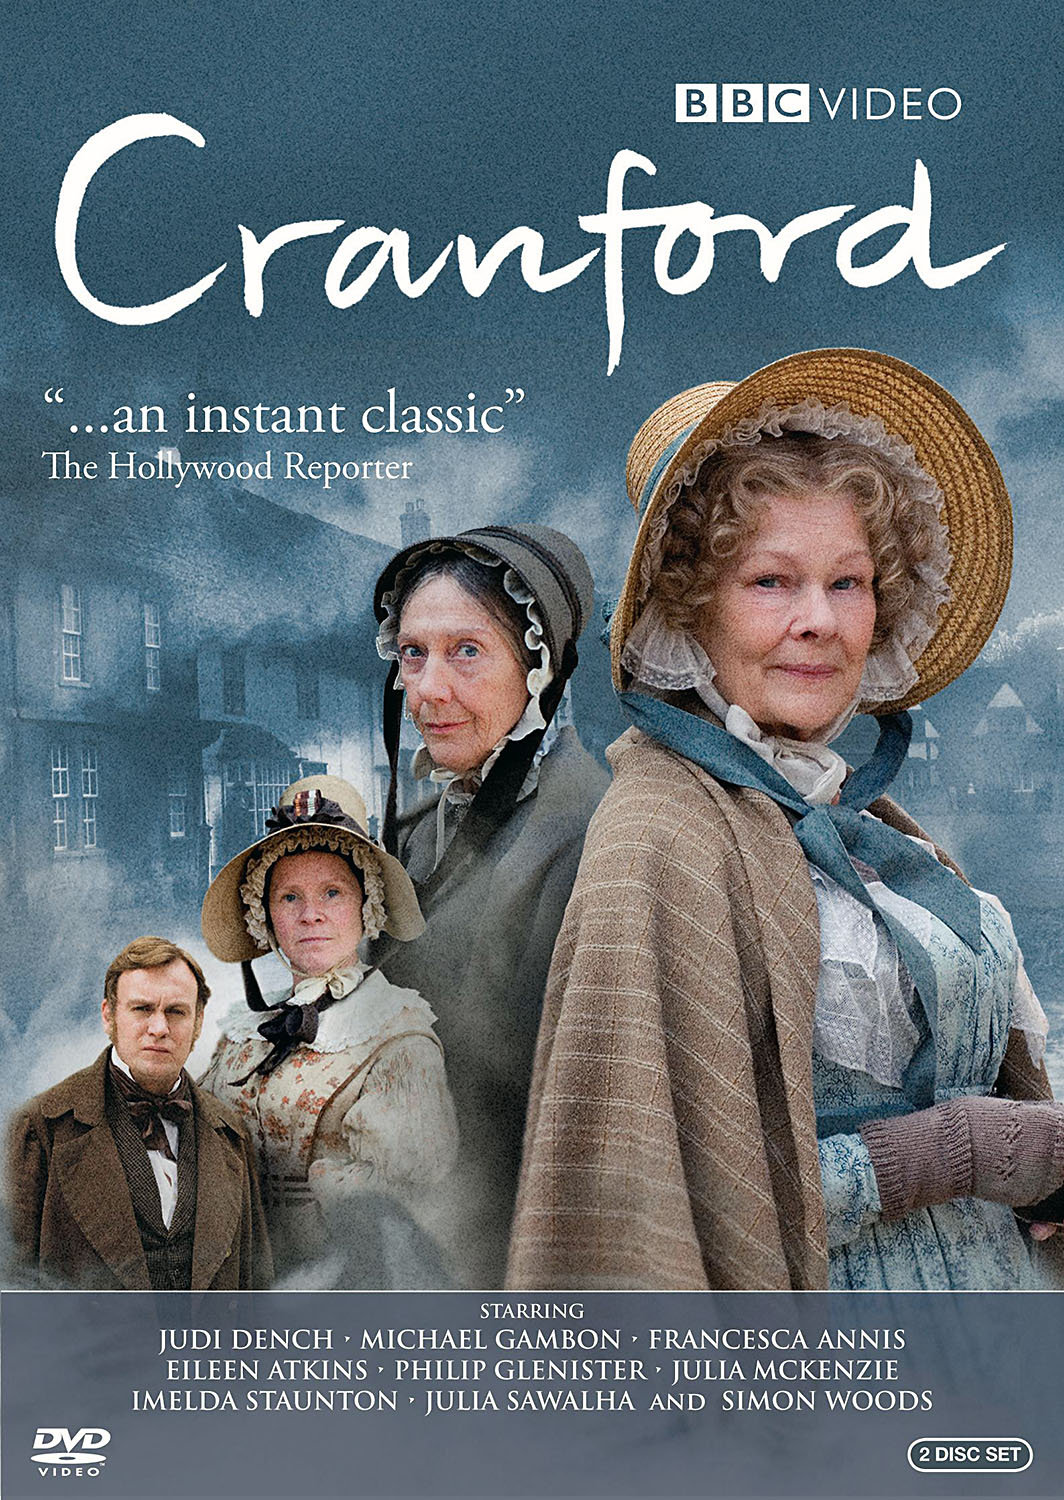 Should I See It?: Cranford Review